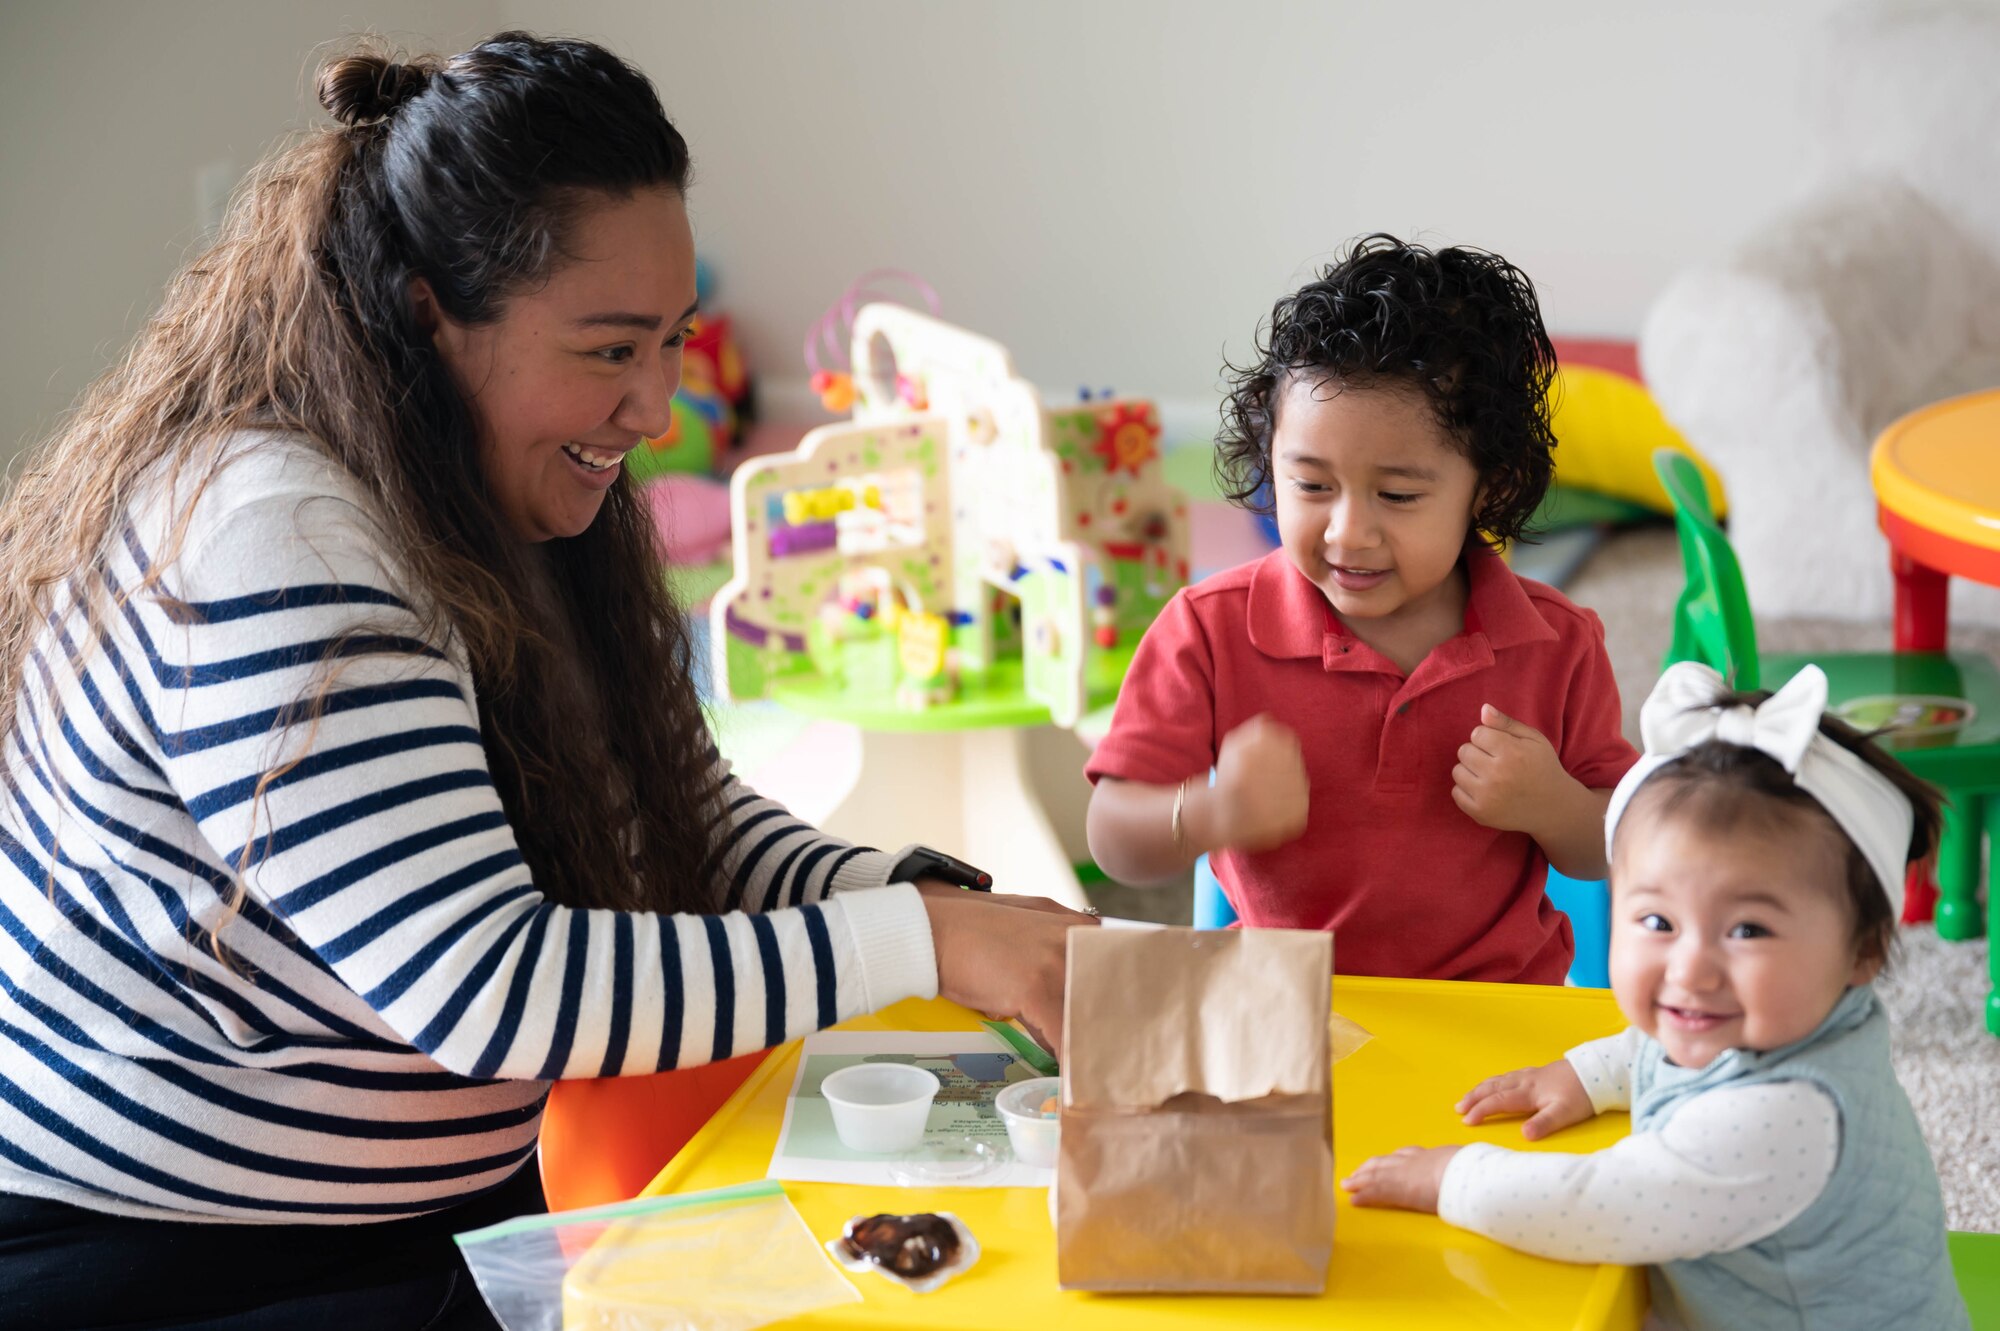 Iris Colon Salcido, left, stay-at-home mother and prospective Family Child Care provider, completes an Earth Day activity with her children three-year-old Luis Scalcedo, center, and 10-month-old Alessia Salcedo, April 22, 2021, at Malmstrom Air Force Base, Mont.